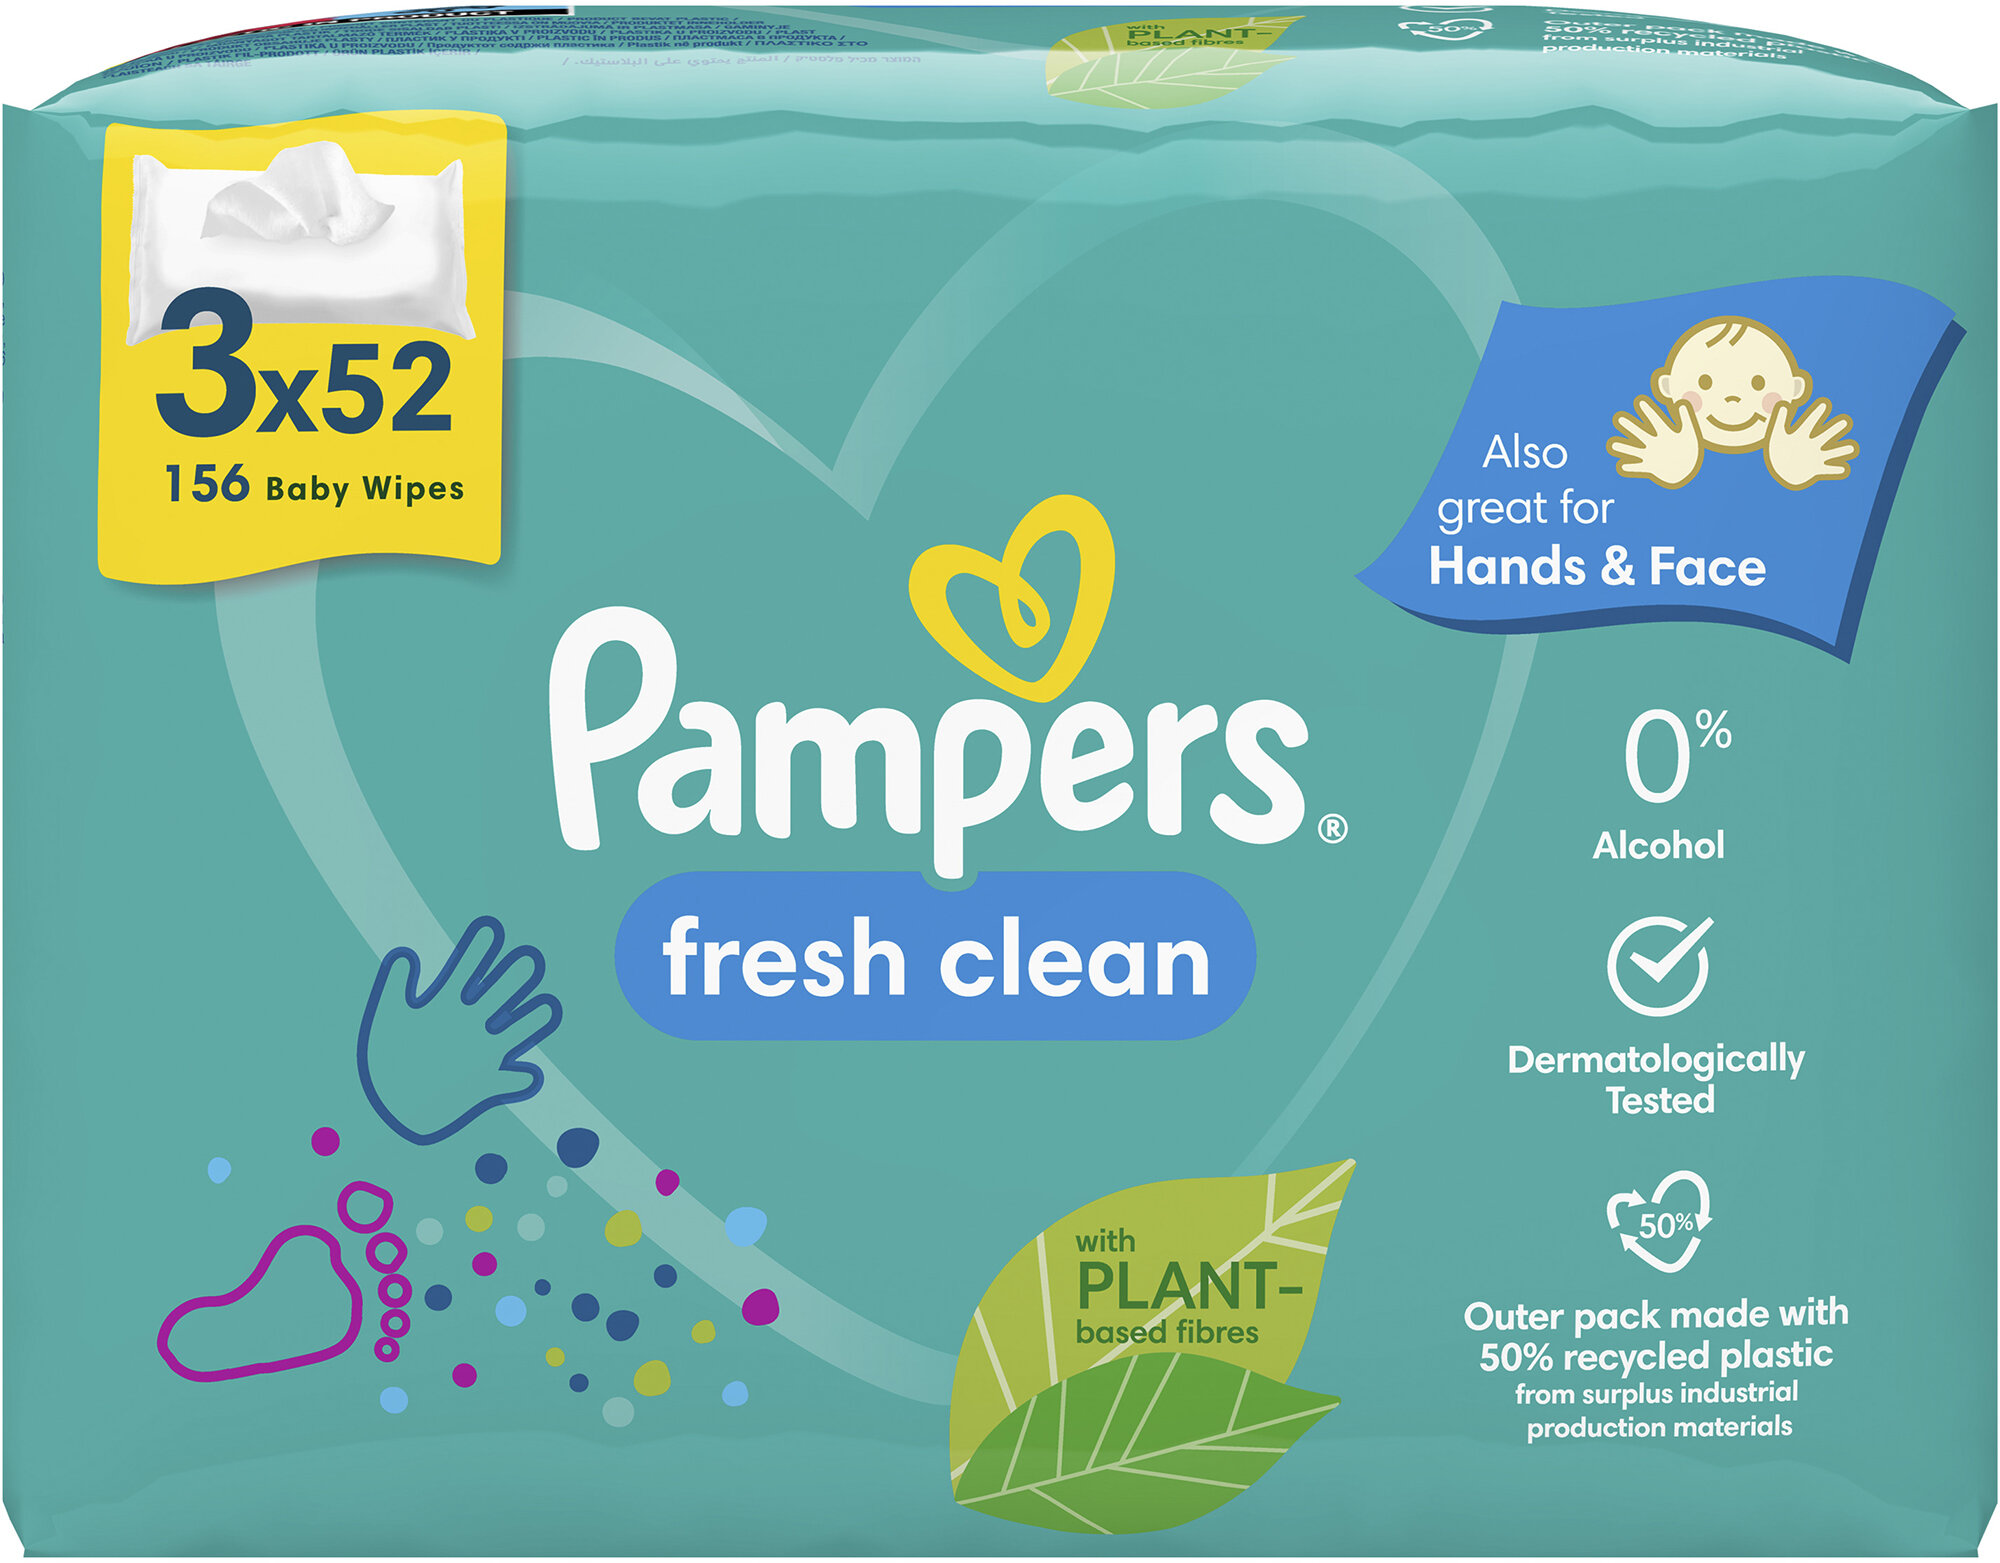 rossamn pampers pants premium care 4